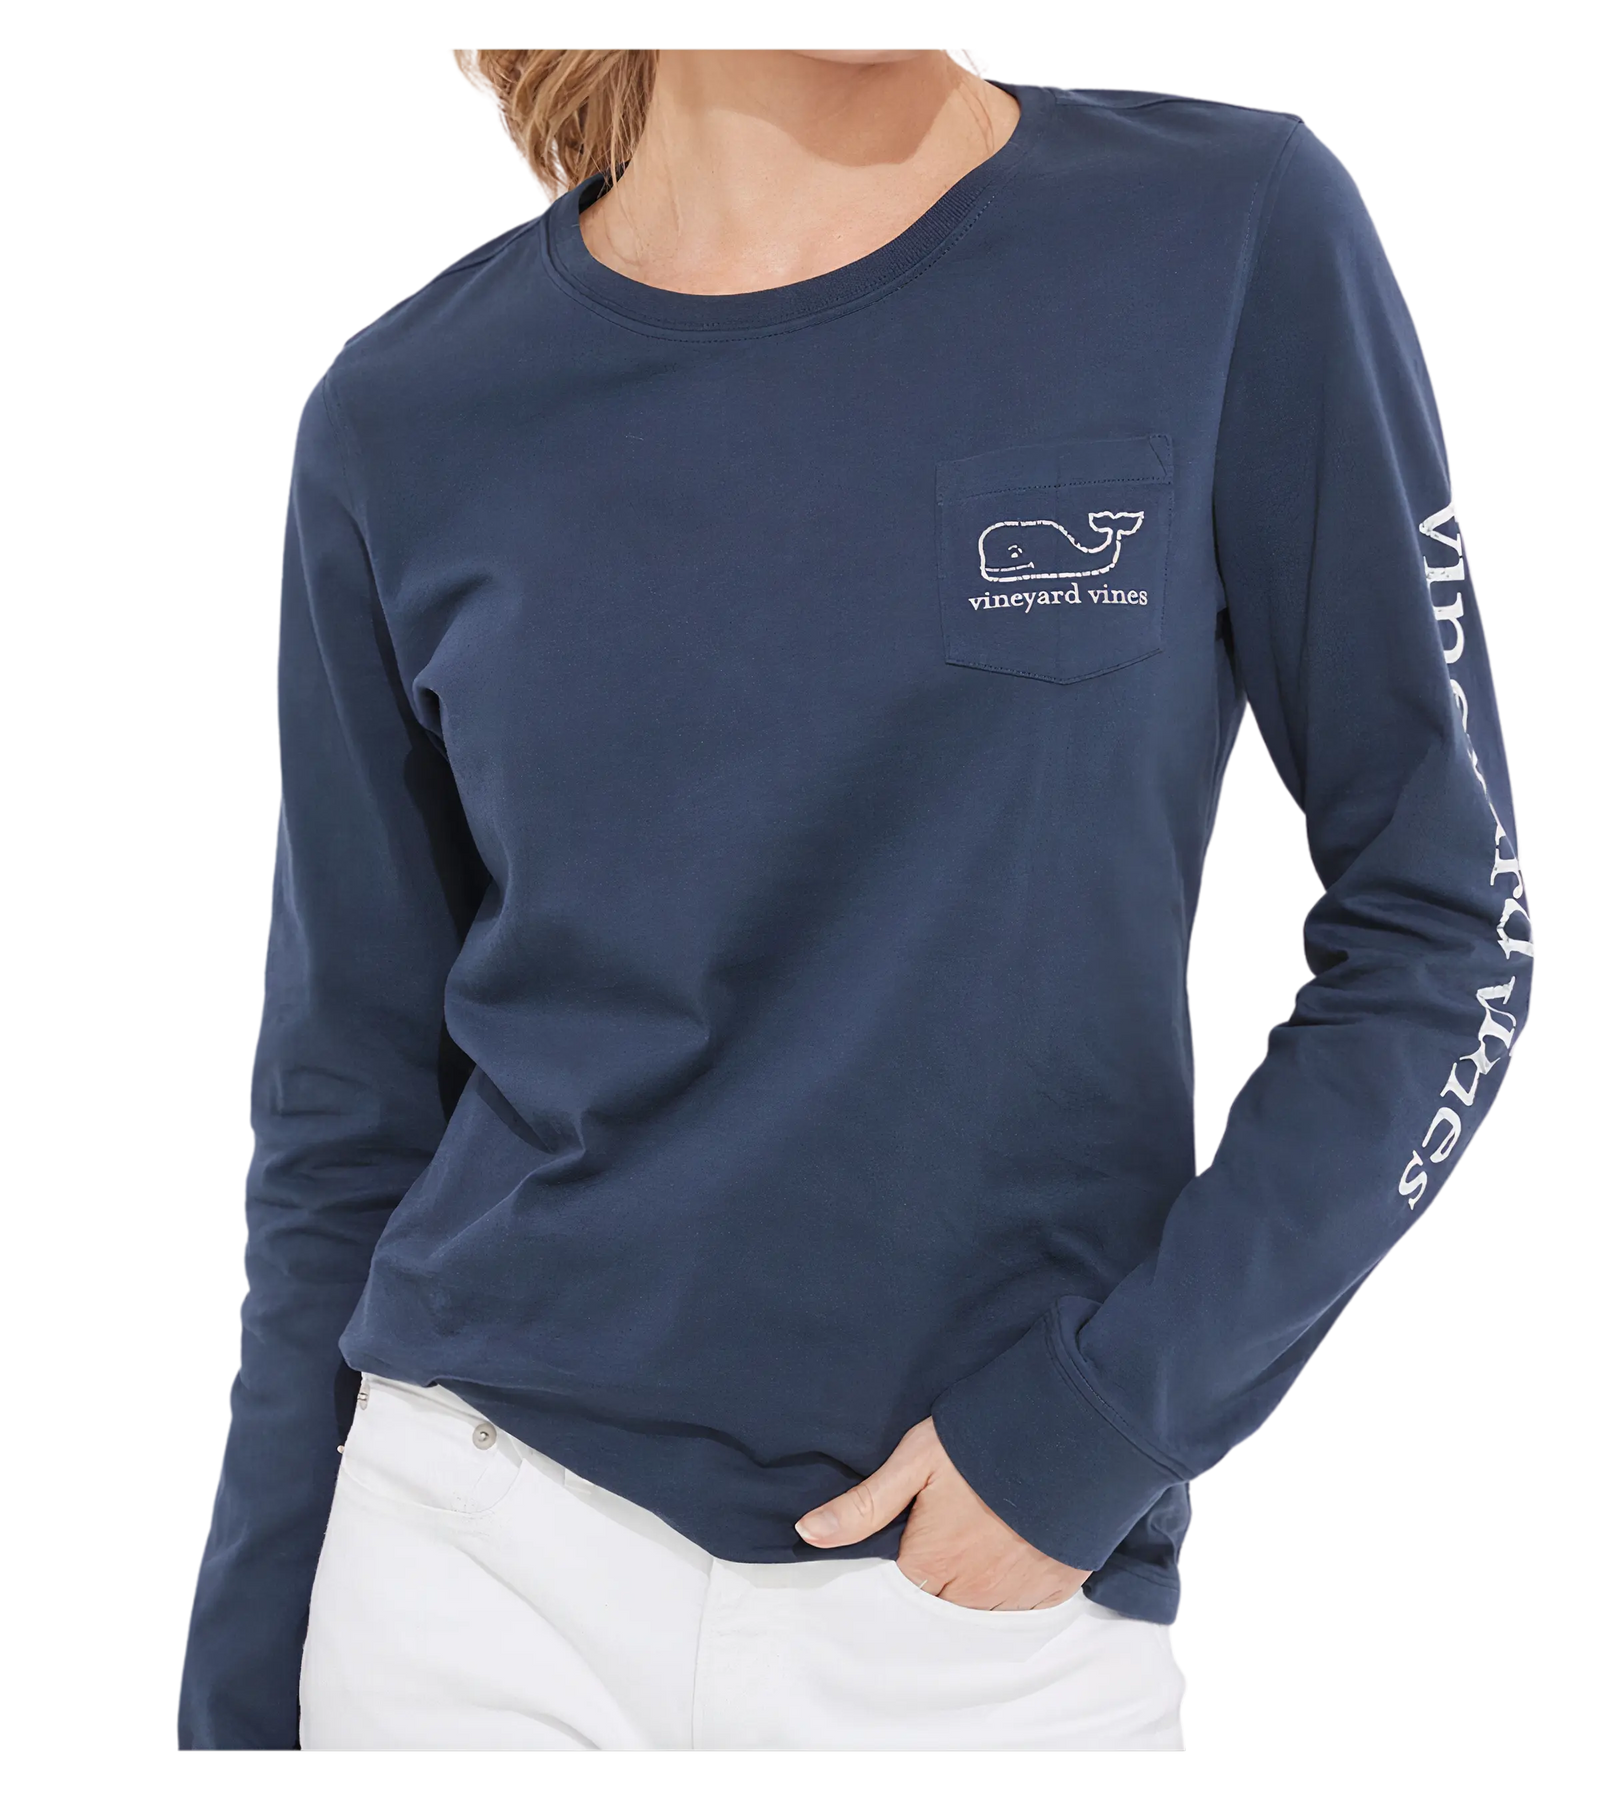 Vineyard Vines Shirt Womens Small Top Blue Whale Boat Boating Preppy Ladies